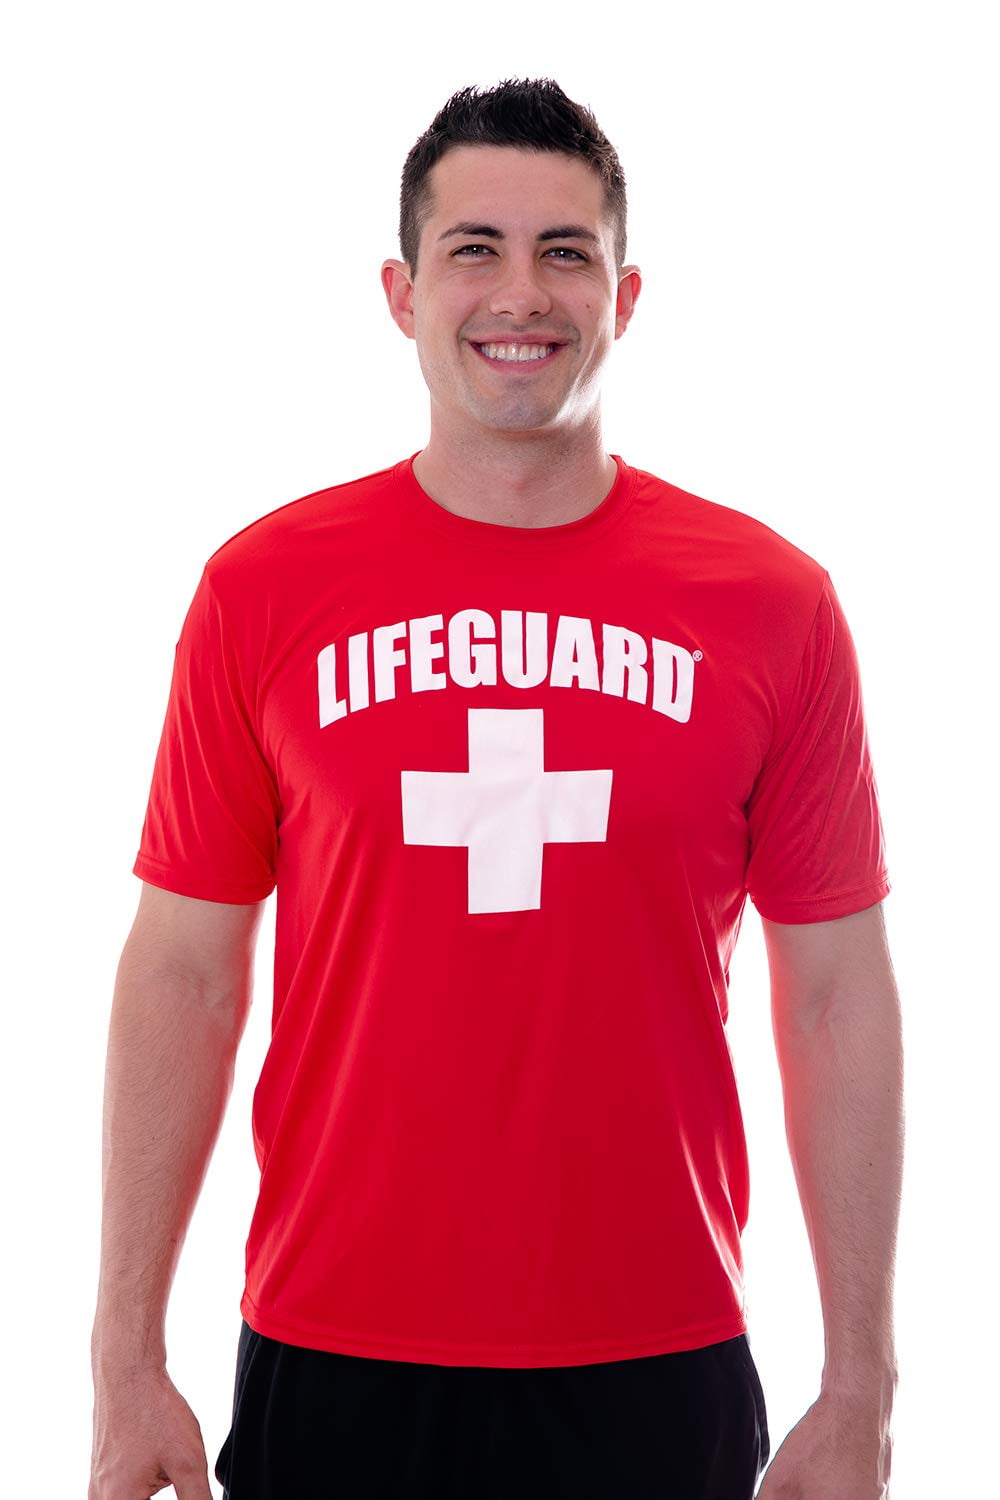 LIFEGUARD Officially Licensed Mens Performance Active Moisture Wicking ...